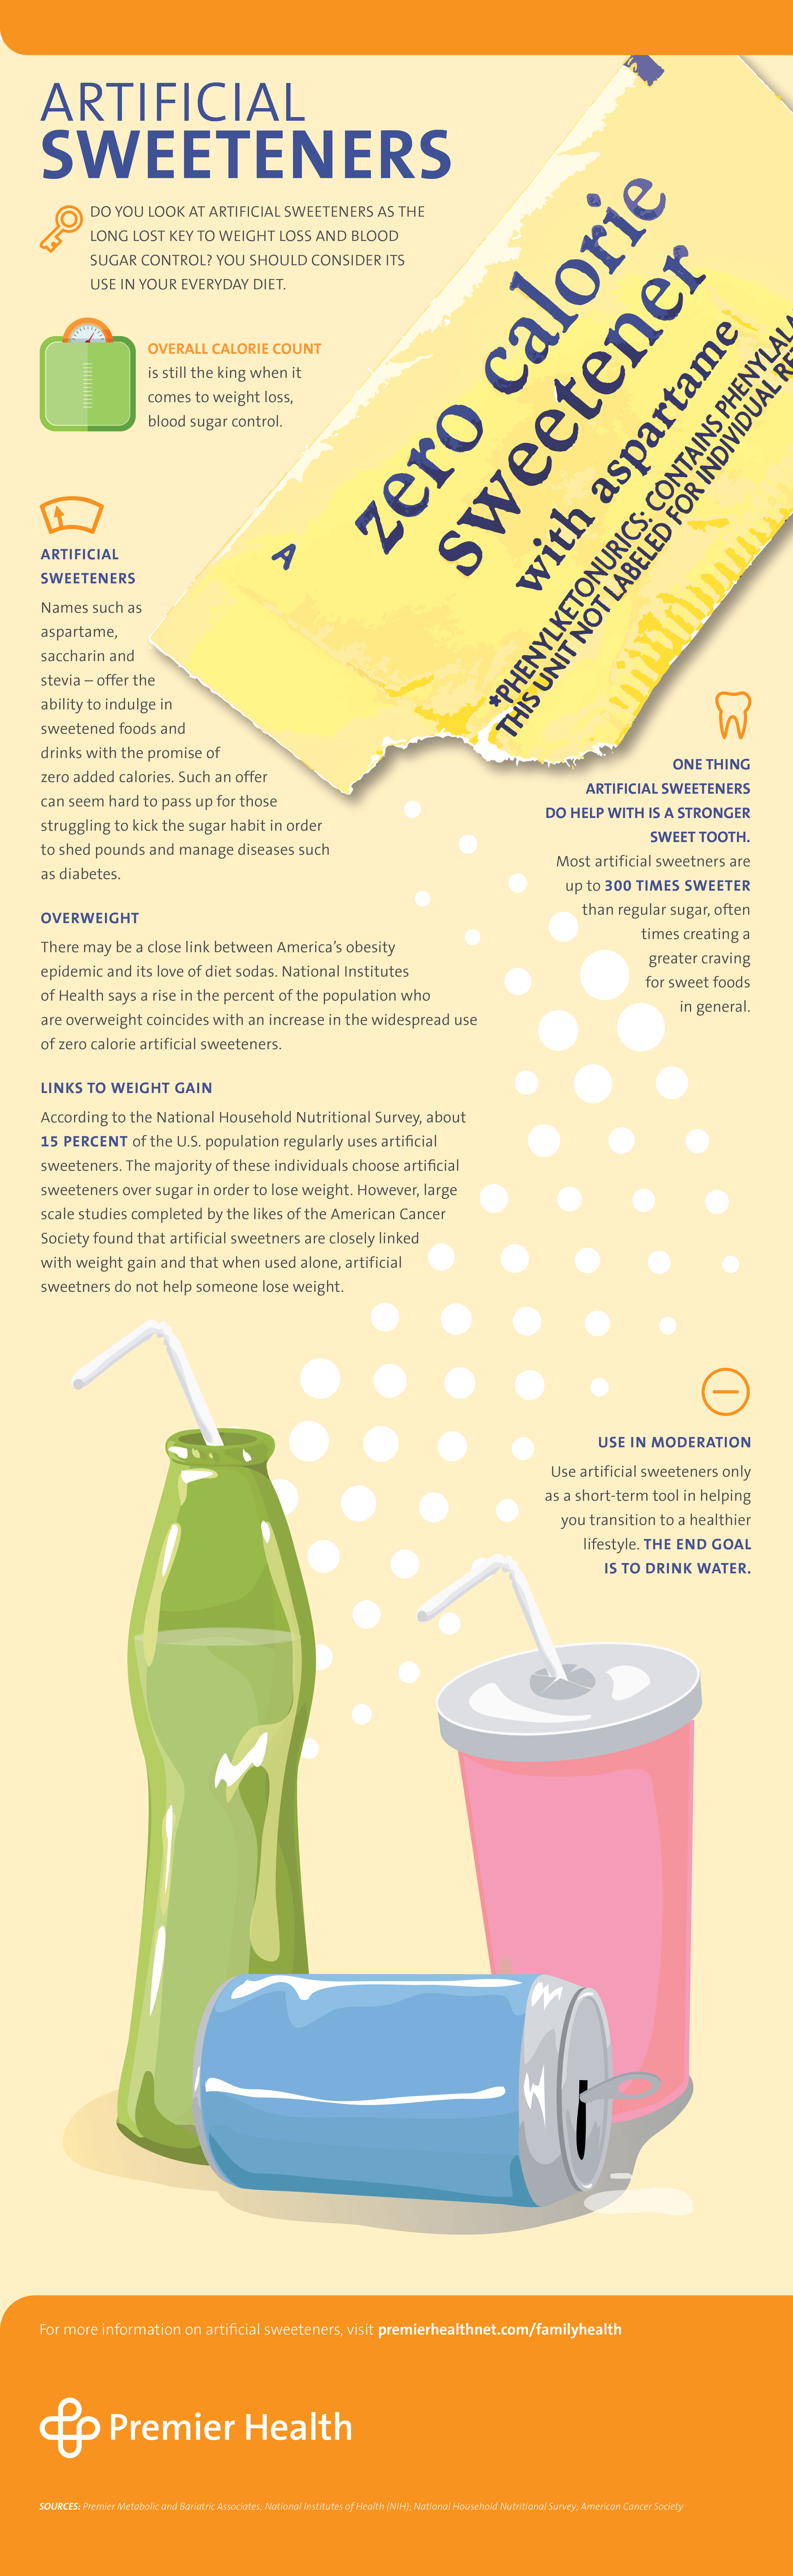 Artificial Sweeteners Infographic